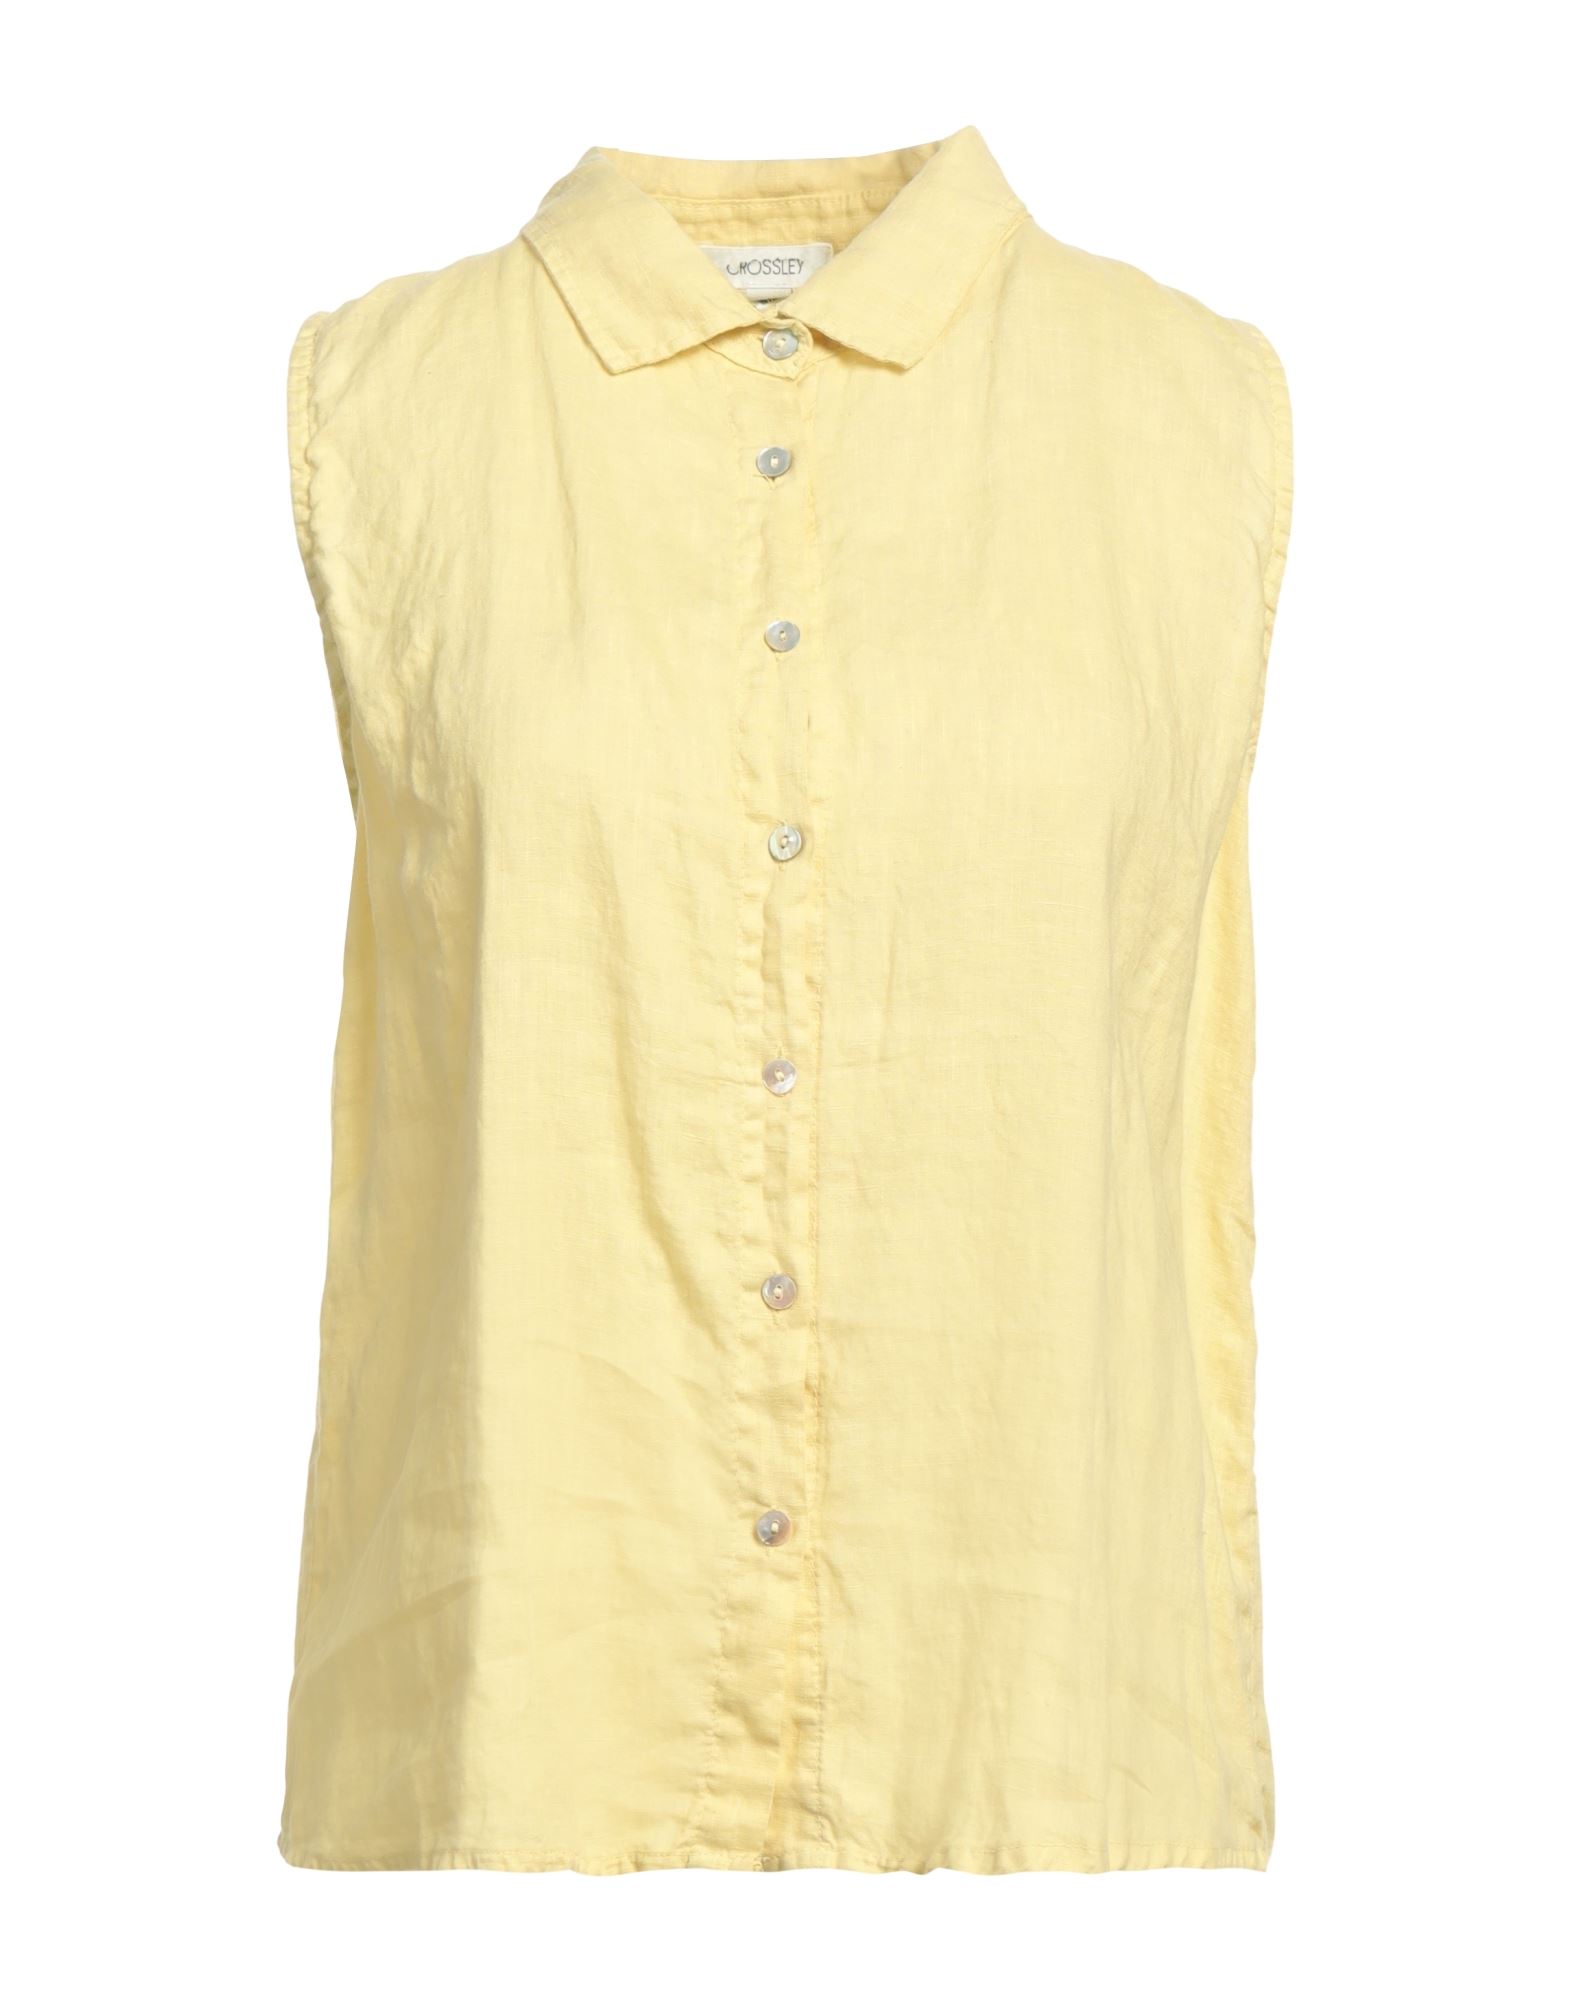 Crossley Shirts In Yellow